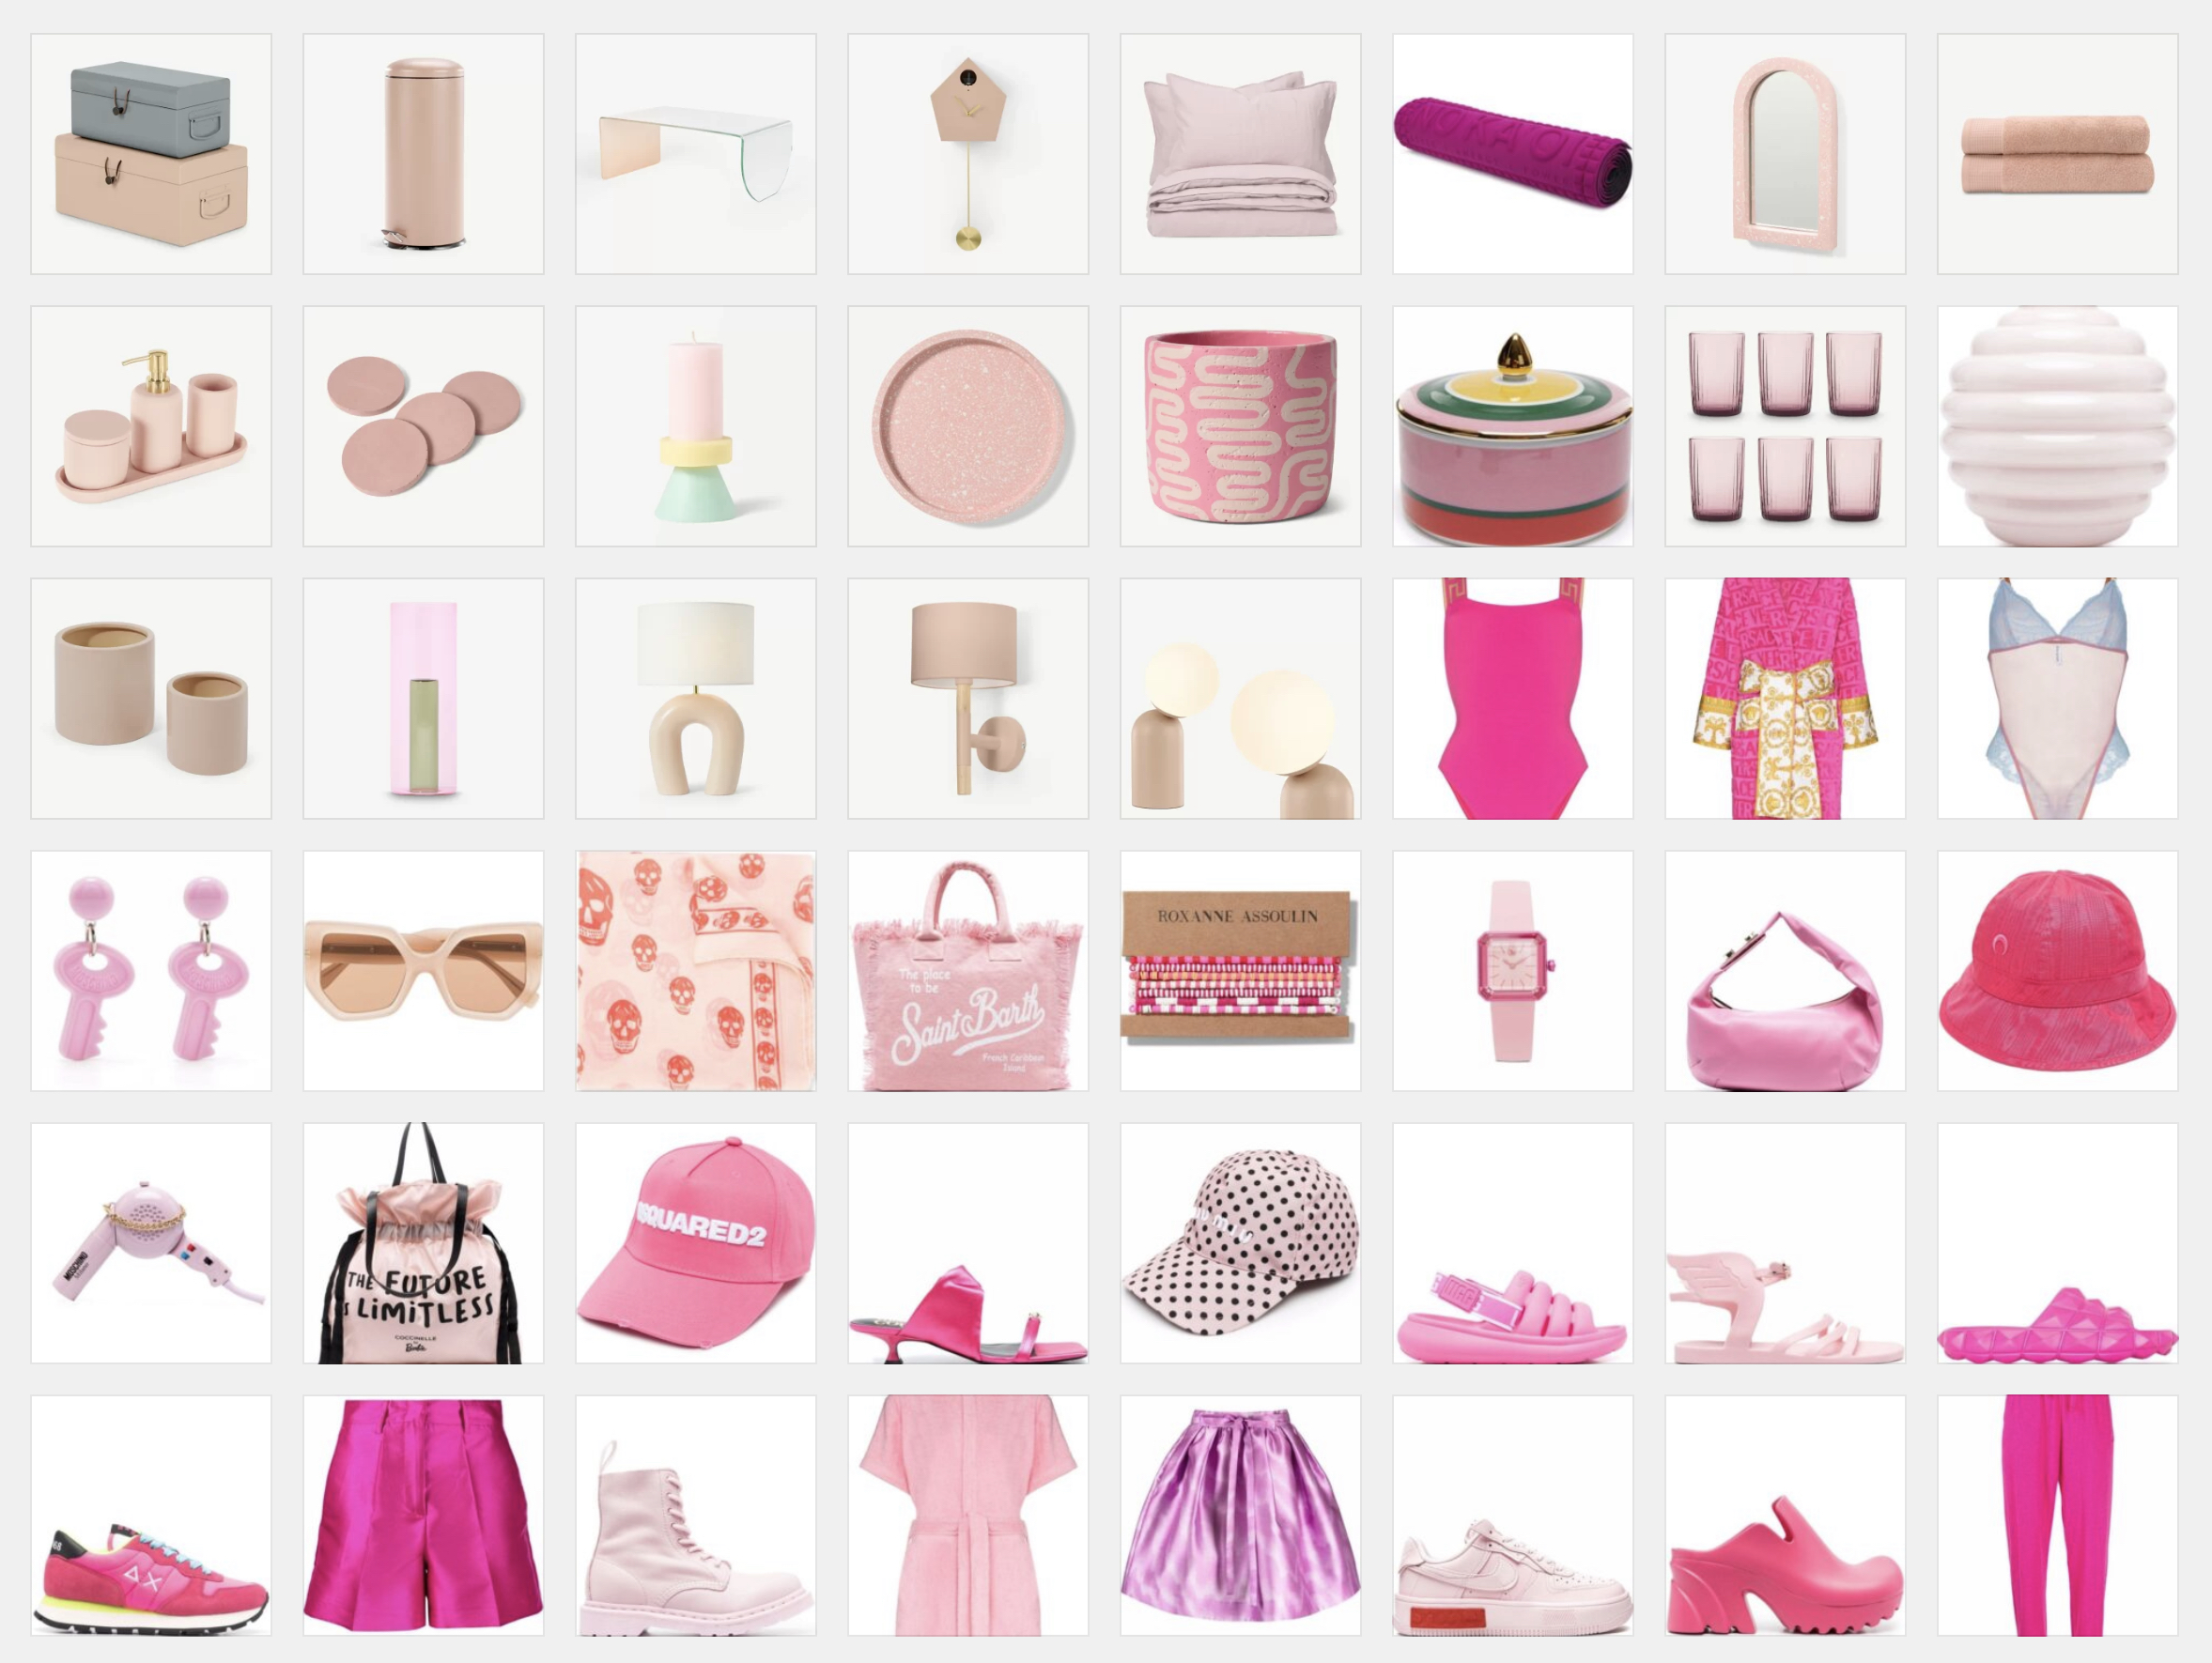 Pastel pink, rose pink and hot pink fashion and home decor. Pink dresses, shirts, shoes, hats, jewellery, accessories, beachwear, lamps and home decor.